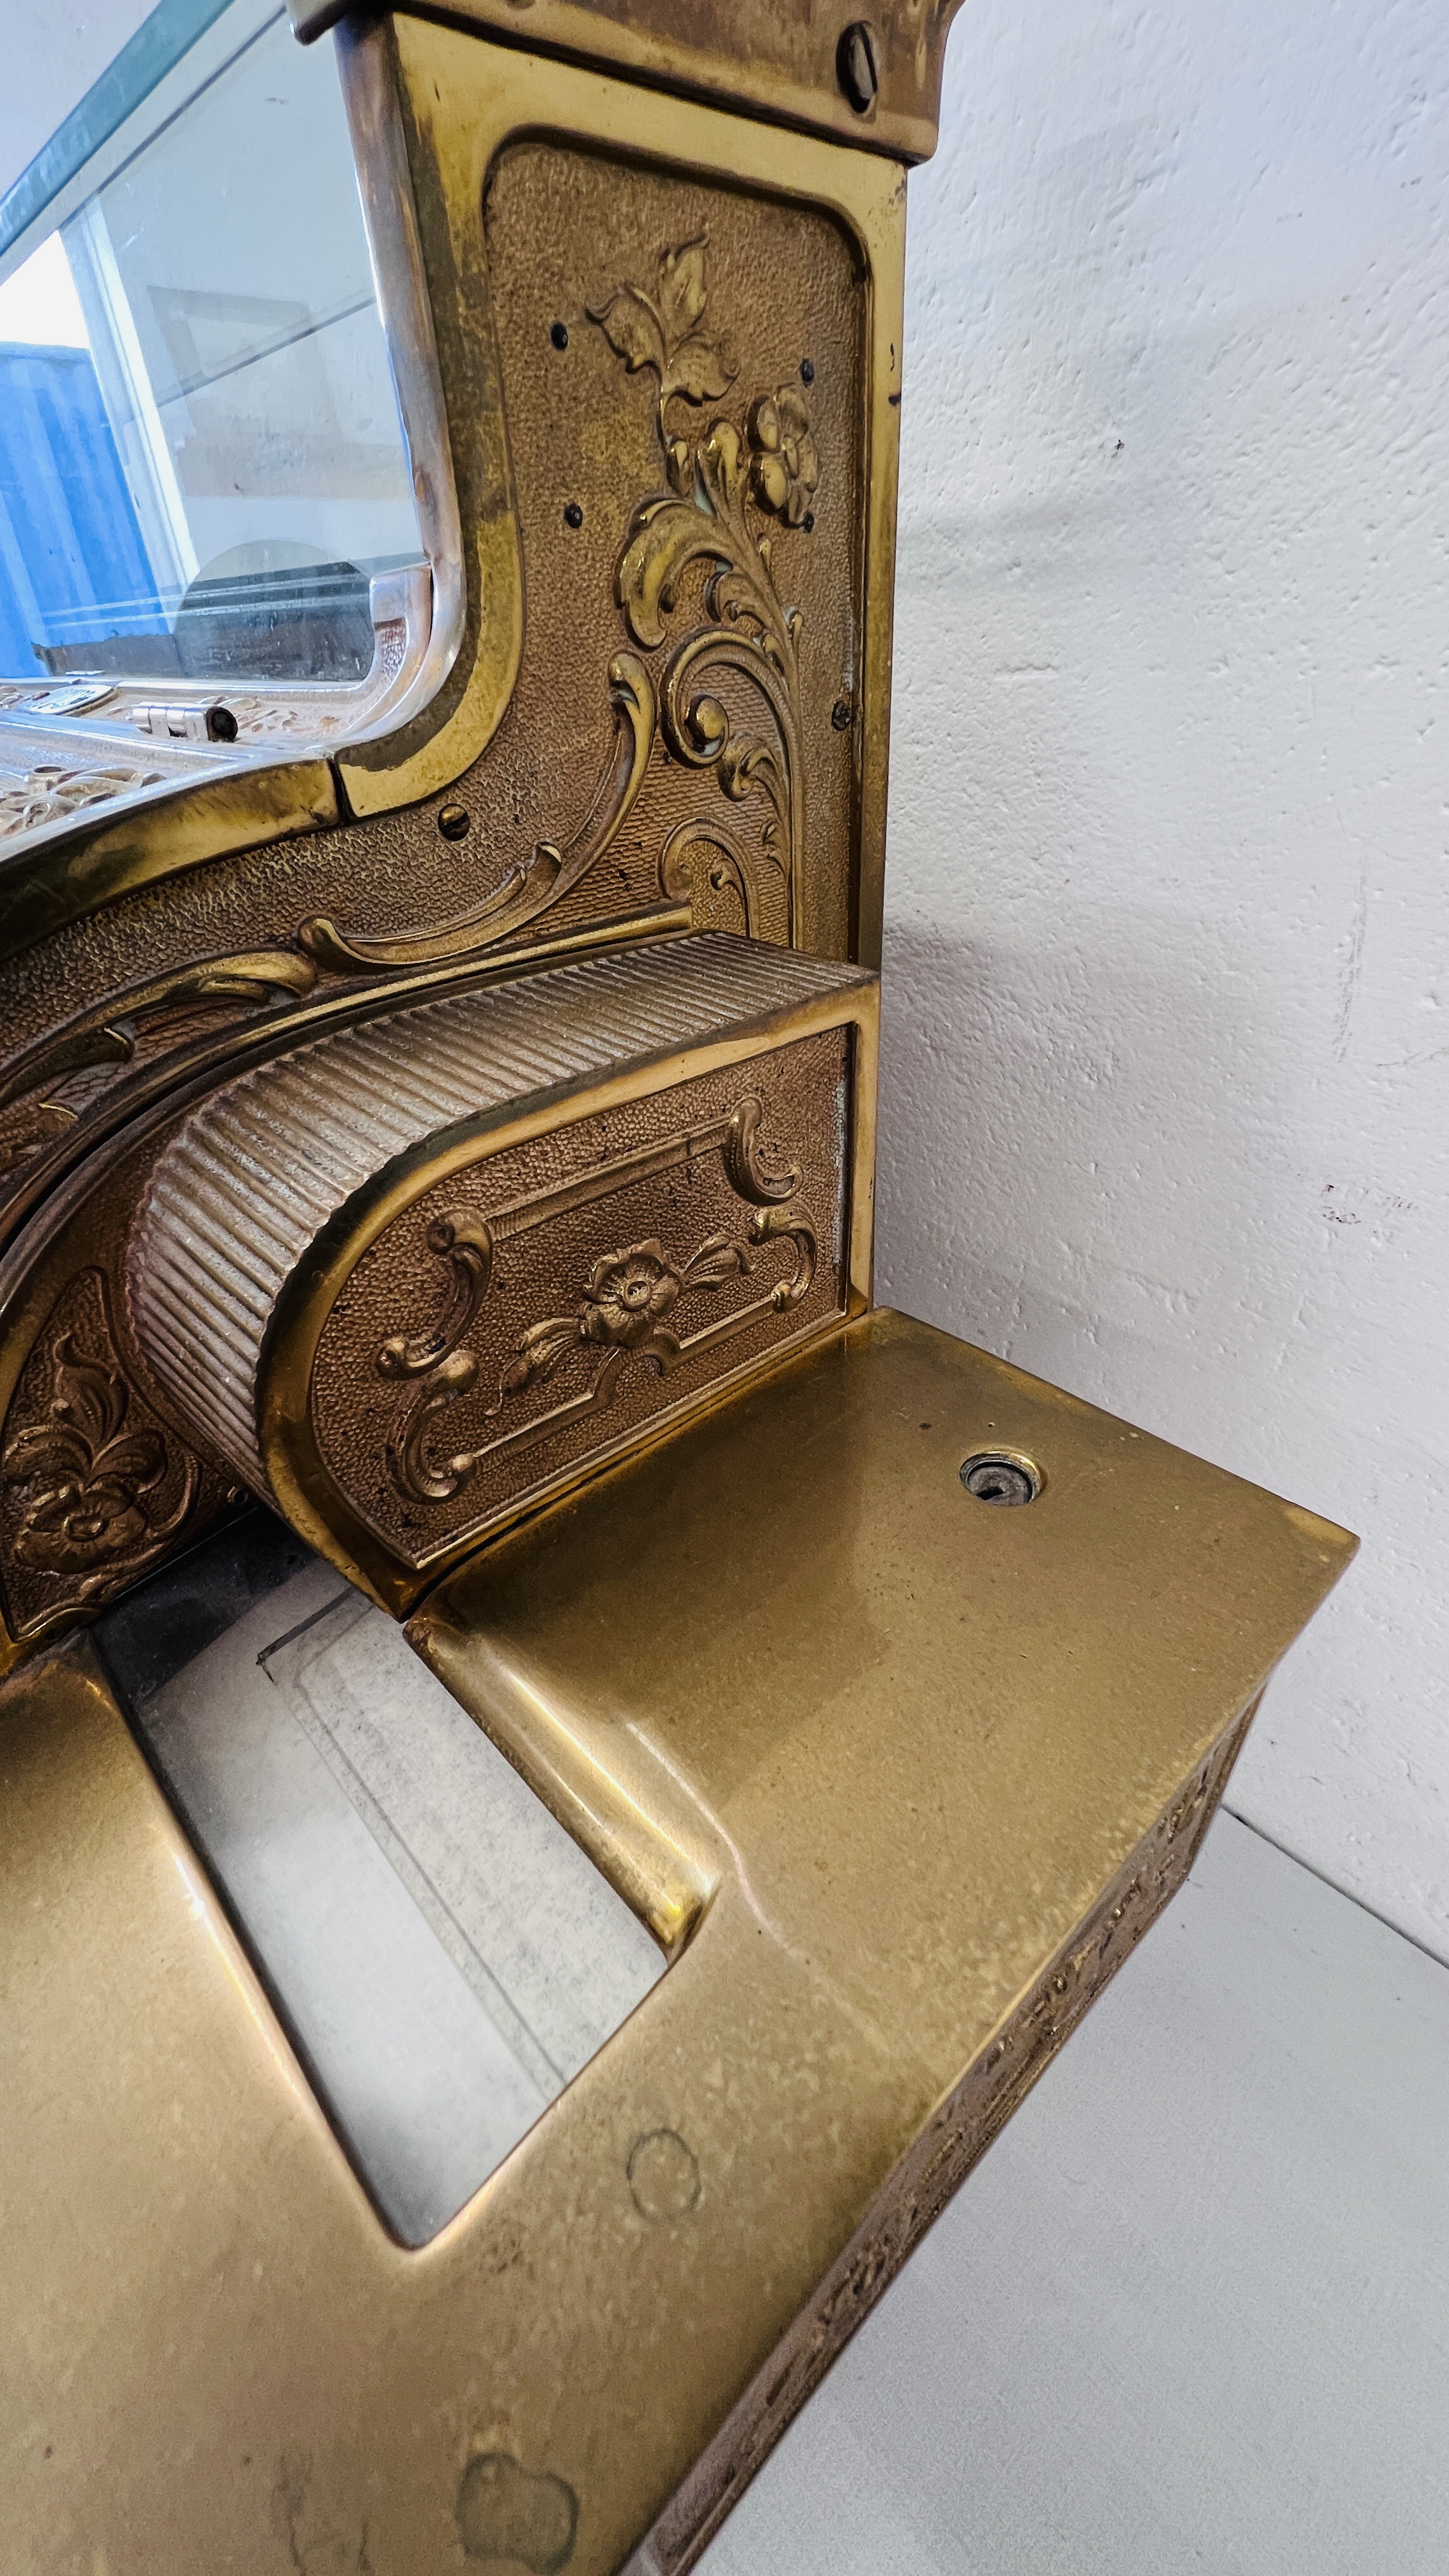 A LARGE 19TH CENTURY NATIONAL CASH REGISTER BRASS TILL - WIDTH 55CM BEARING PLAQUE S4504131358-G. - Image 9 of 23